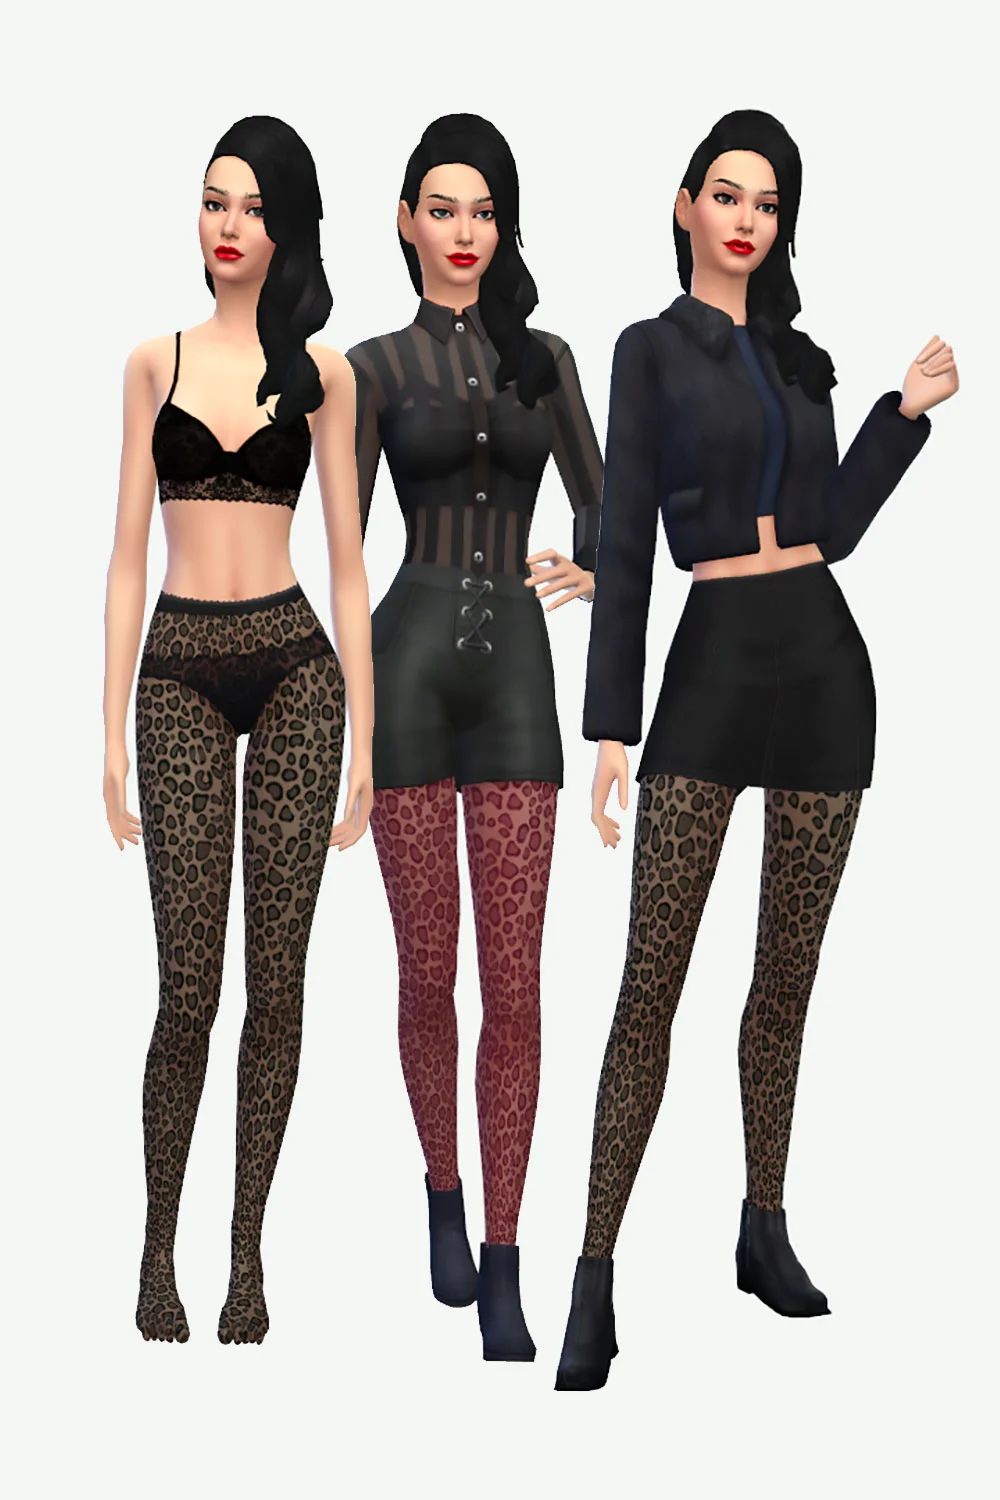 The Sims 4 Leopard Pattern Tights